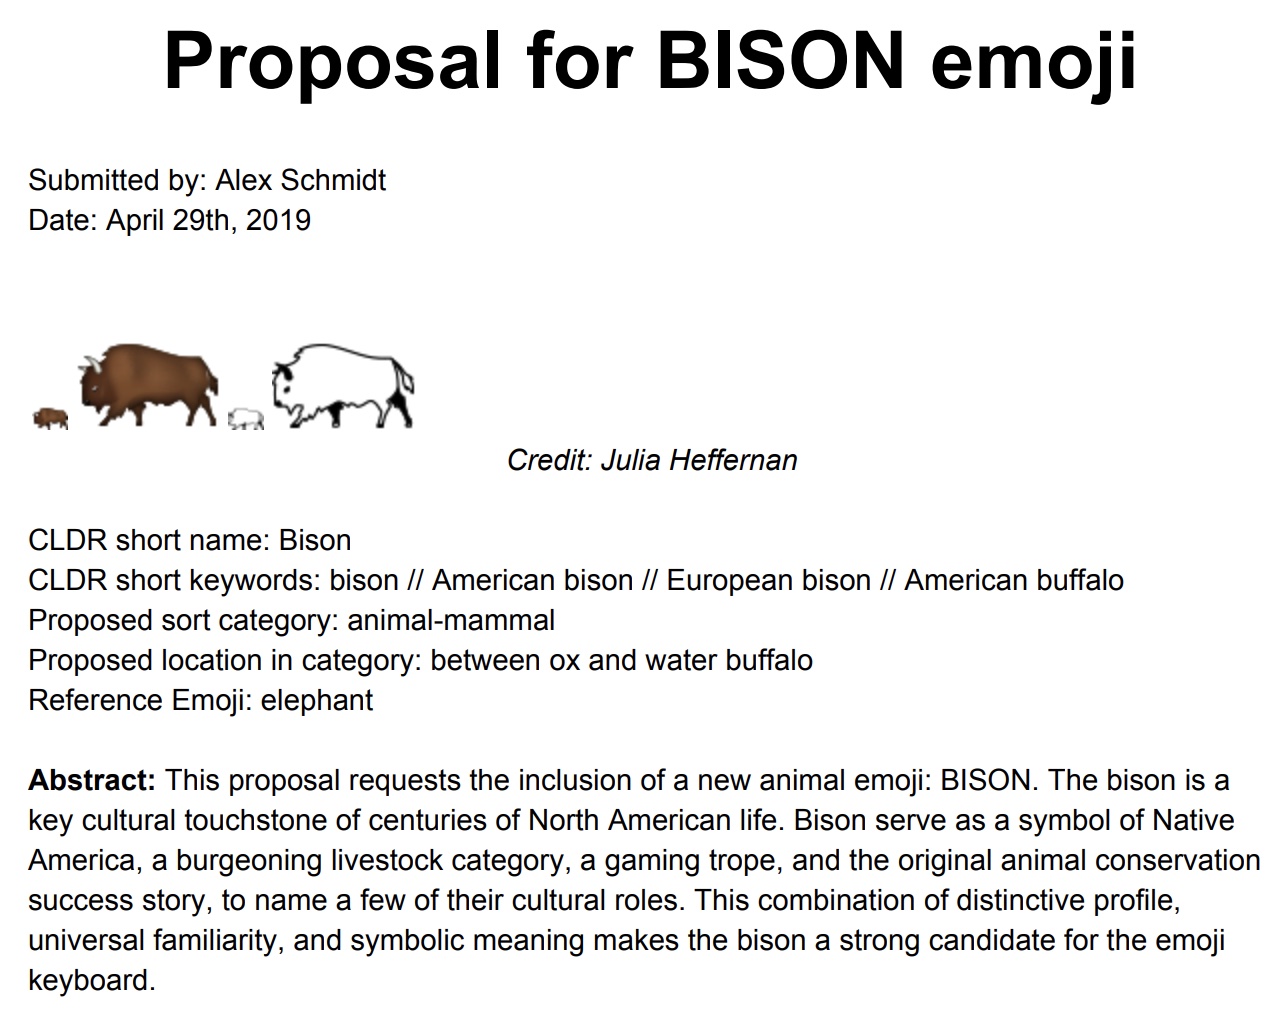 Proposal document for the Bison emoji